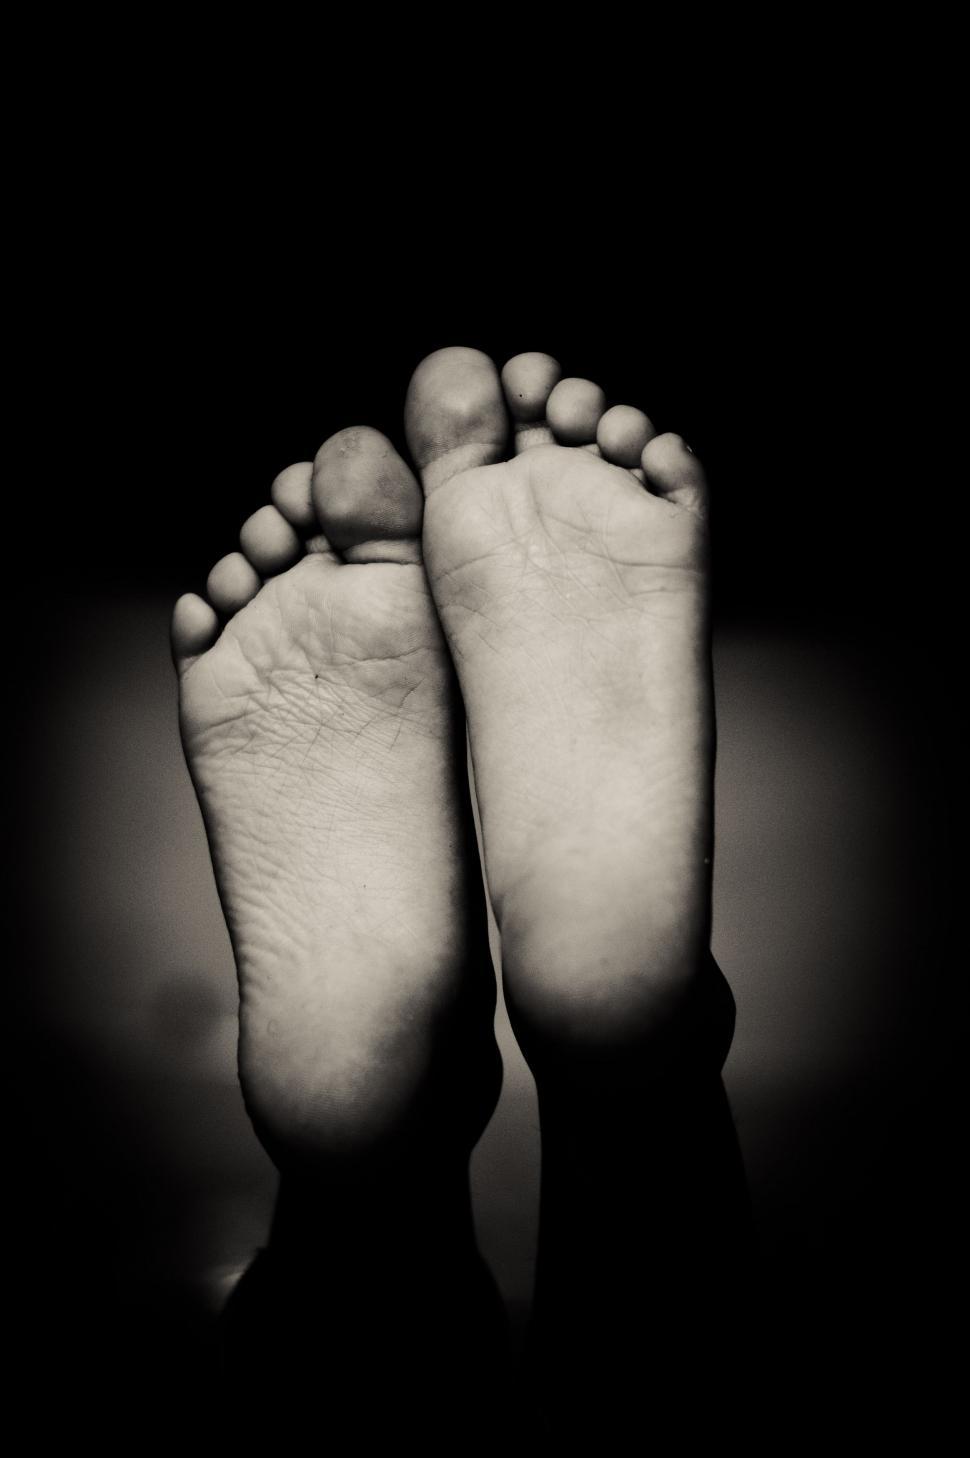 Free Image of Uncovered Feet in Black and White 